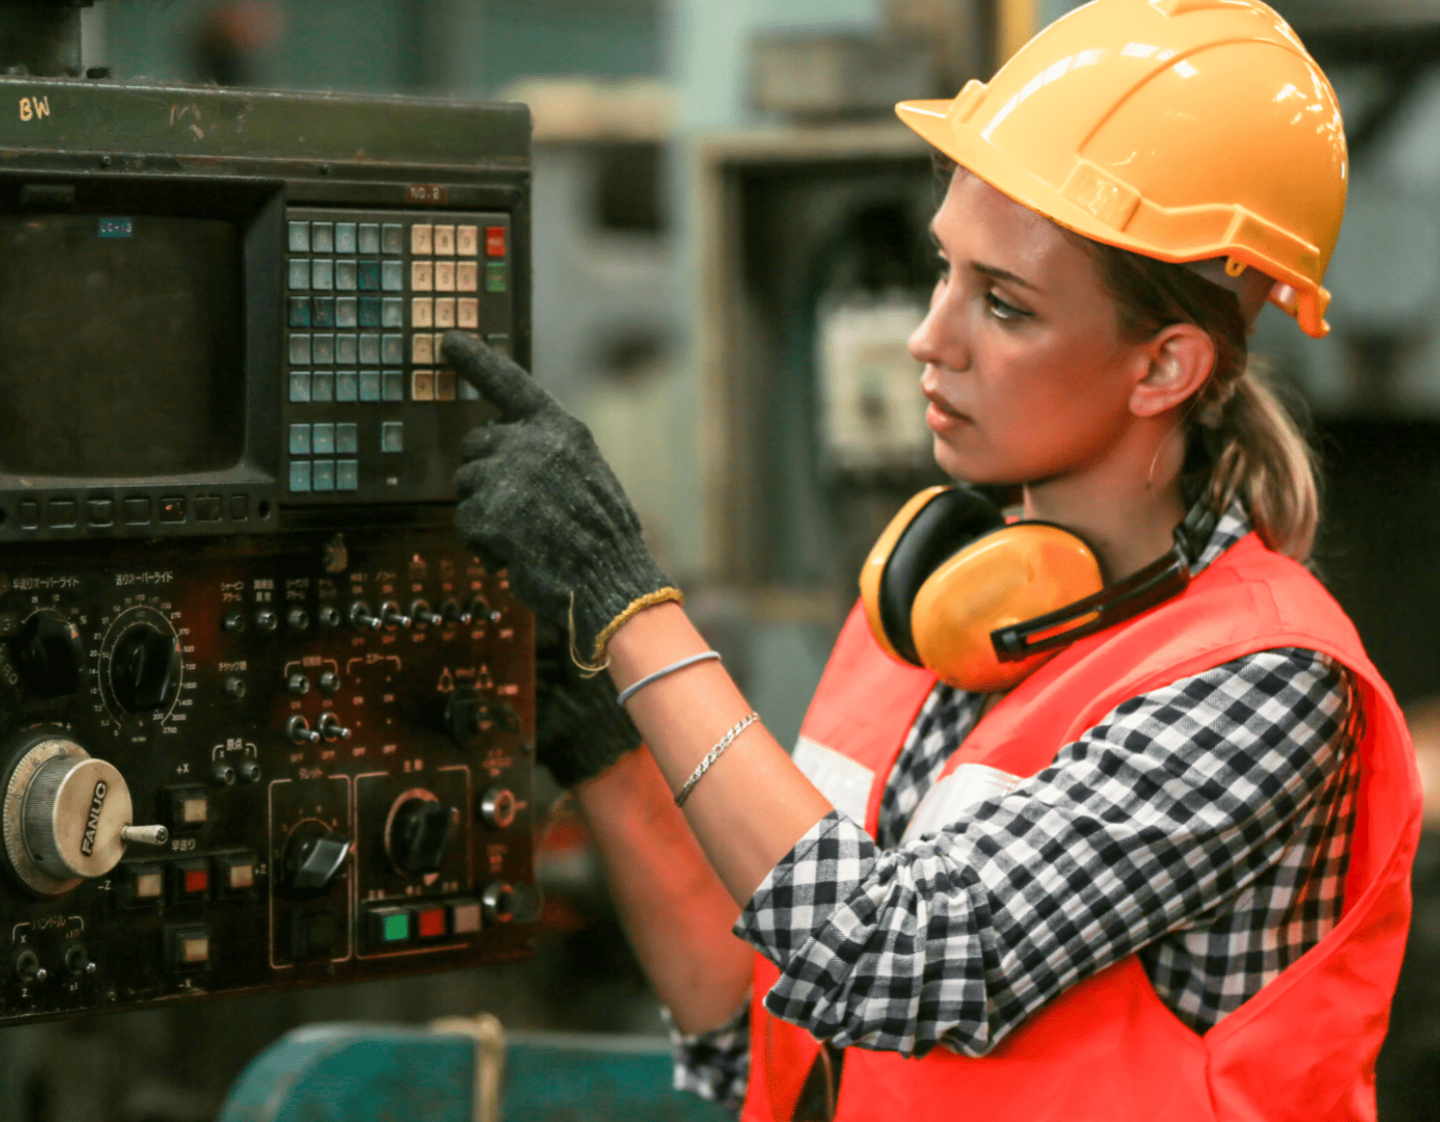 A woman in a high viz jacket and safety gear using a programmable production machine